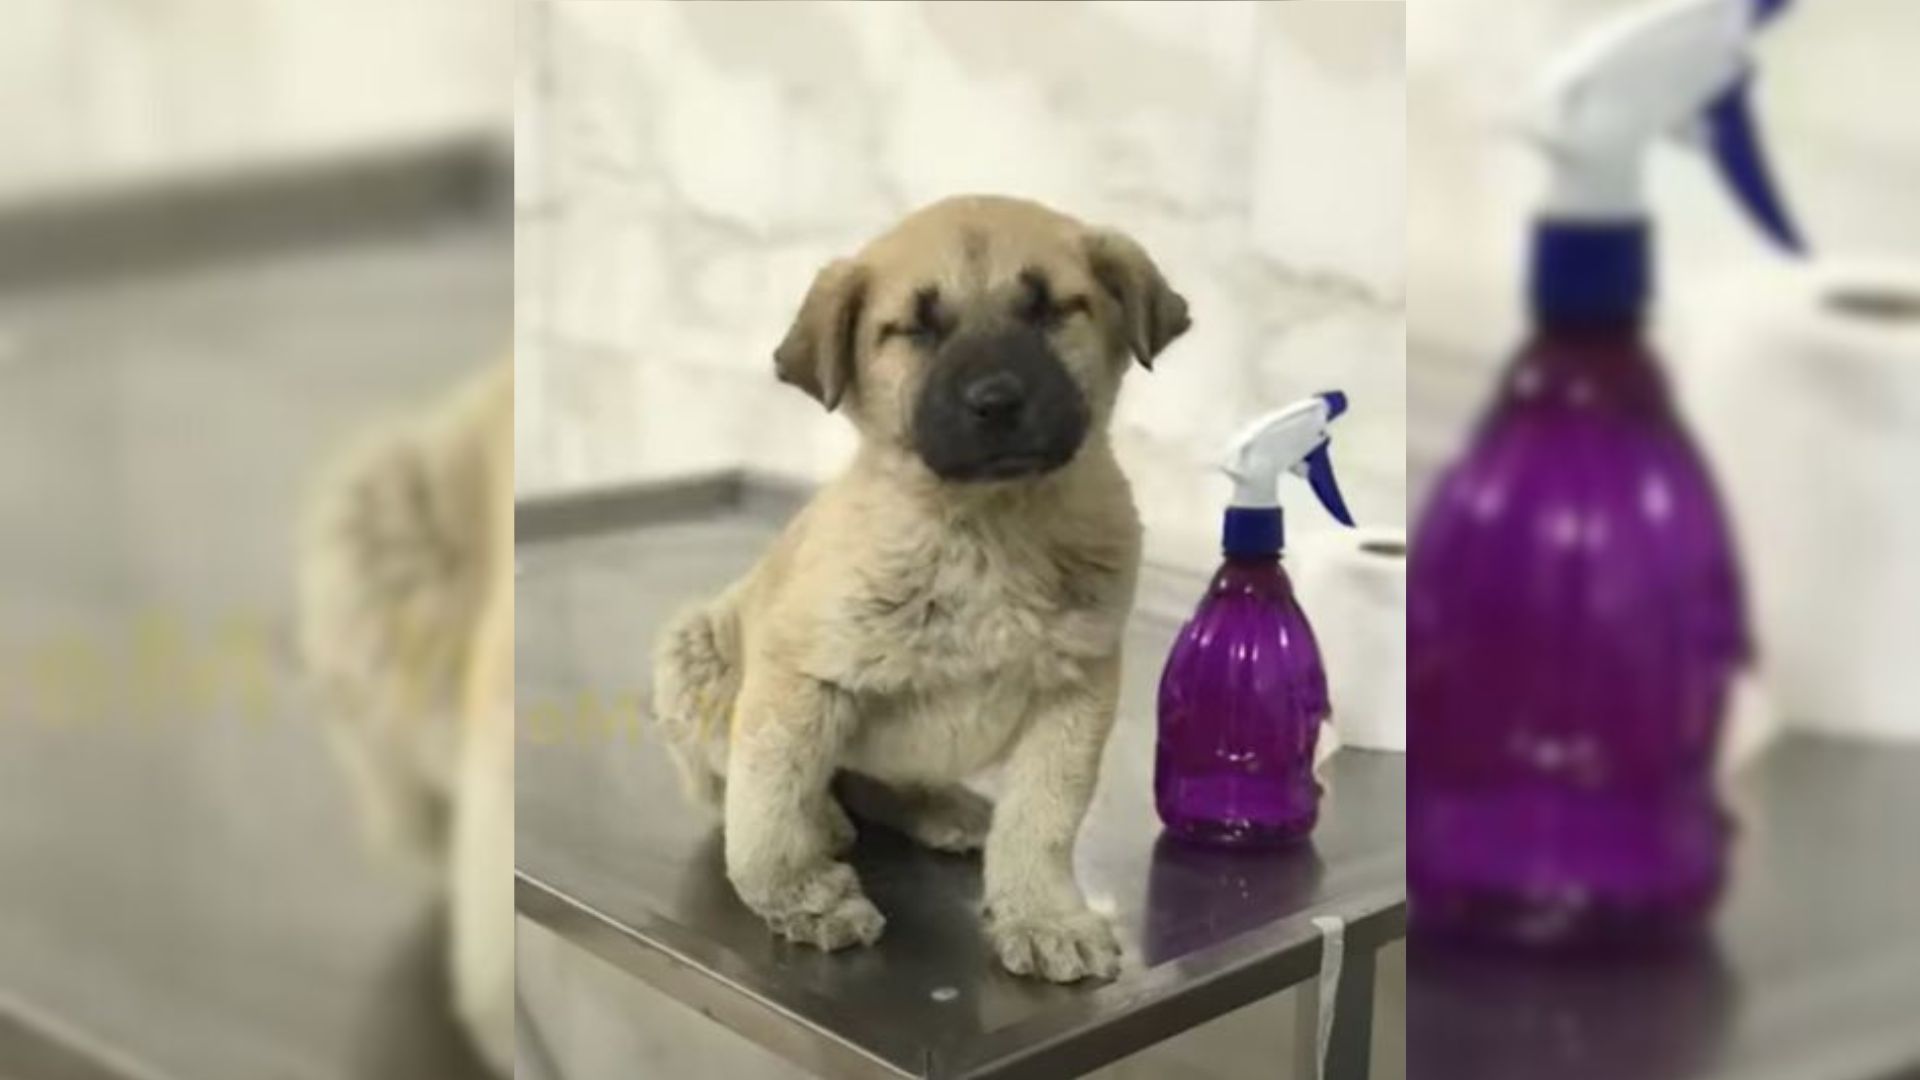 Abandoned Little Pup With A Broken Paw Was Desperately Crying Out For Help